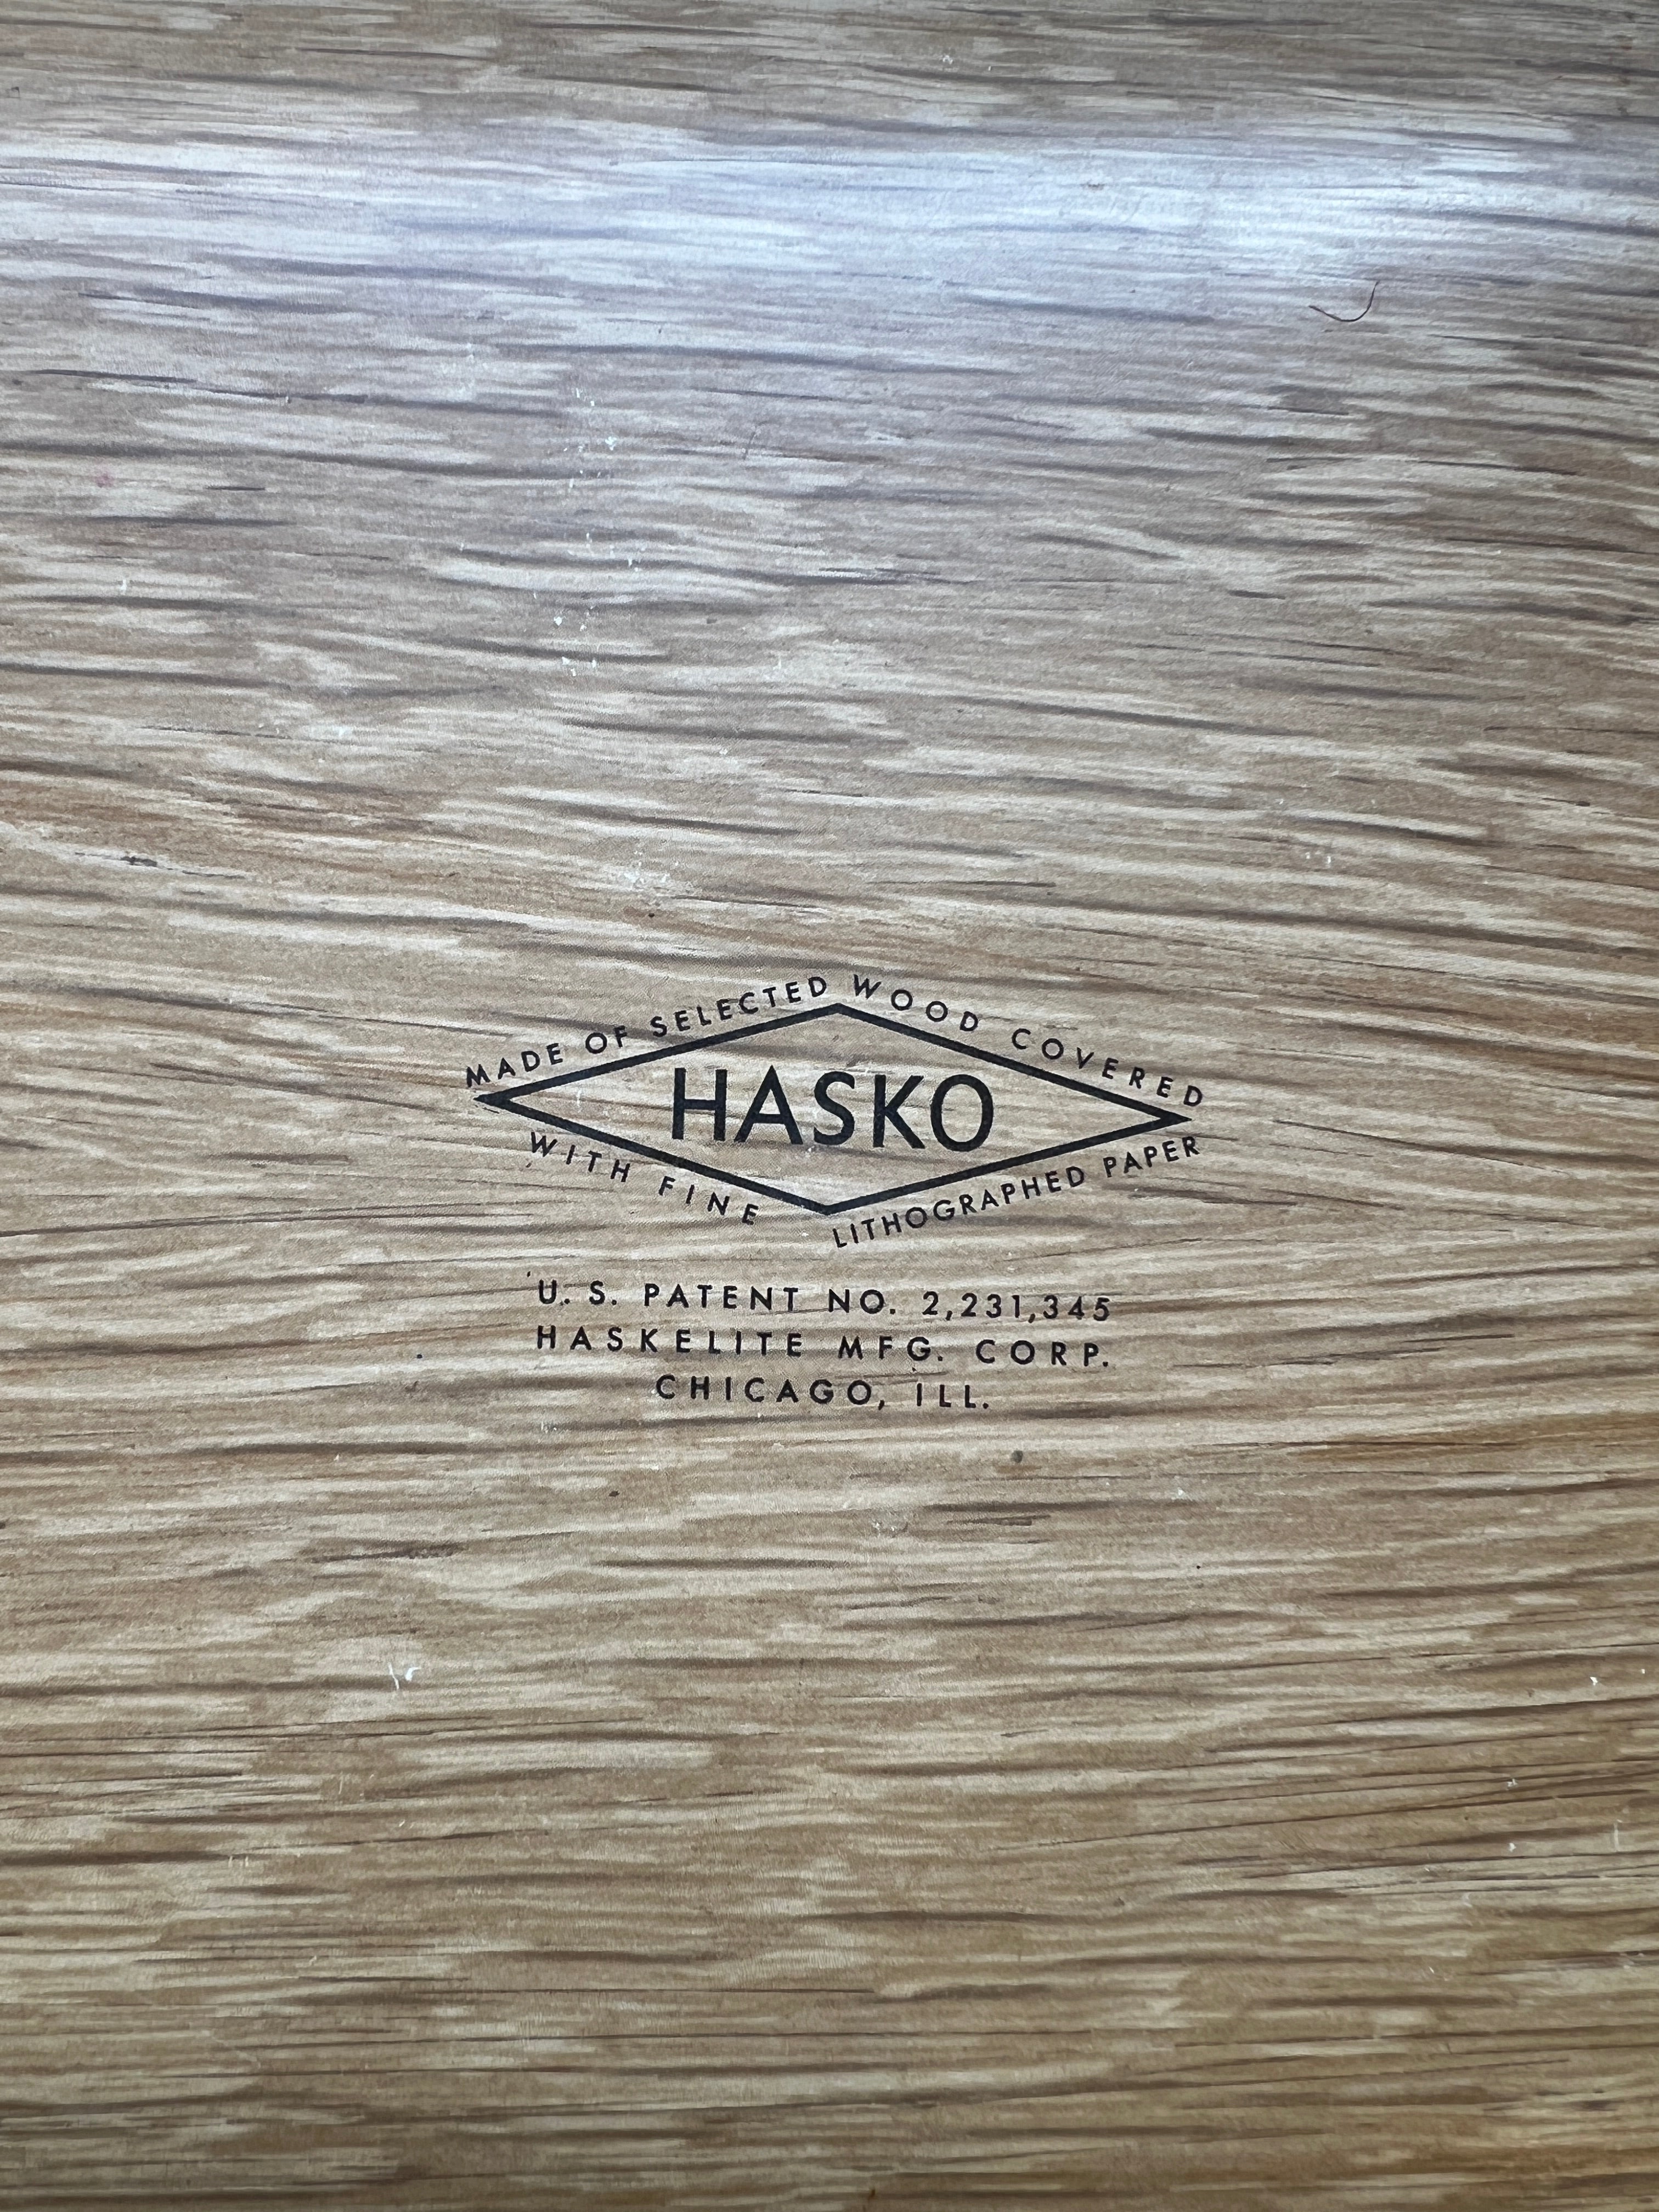 Hasko Wooden and Floral Tray